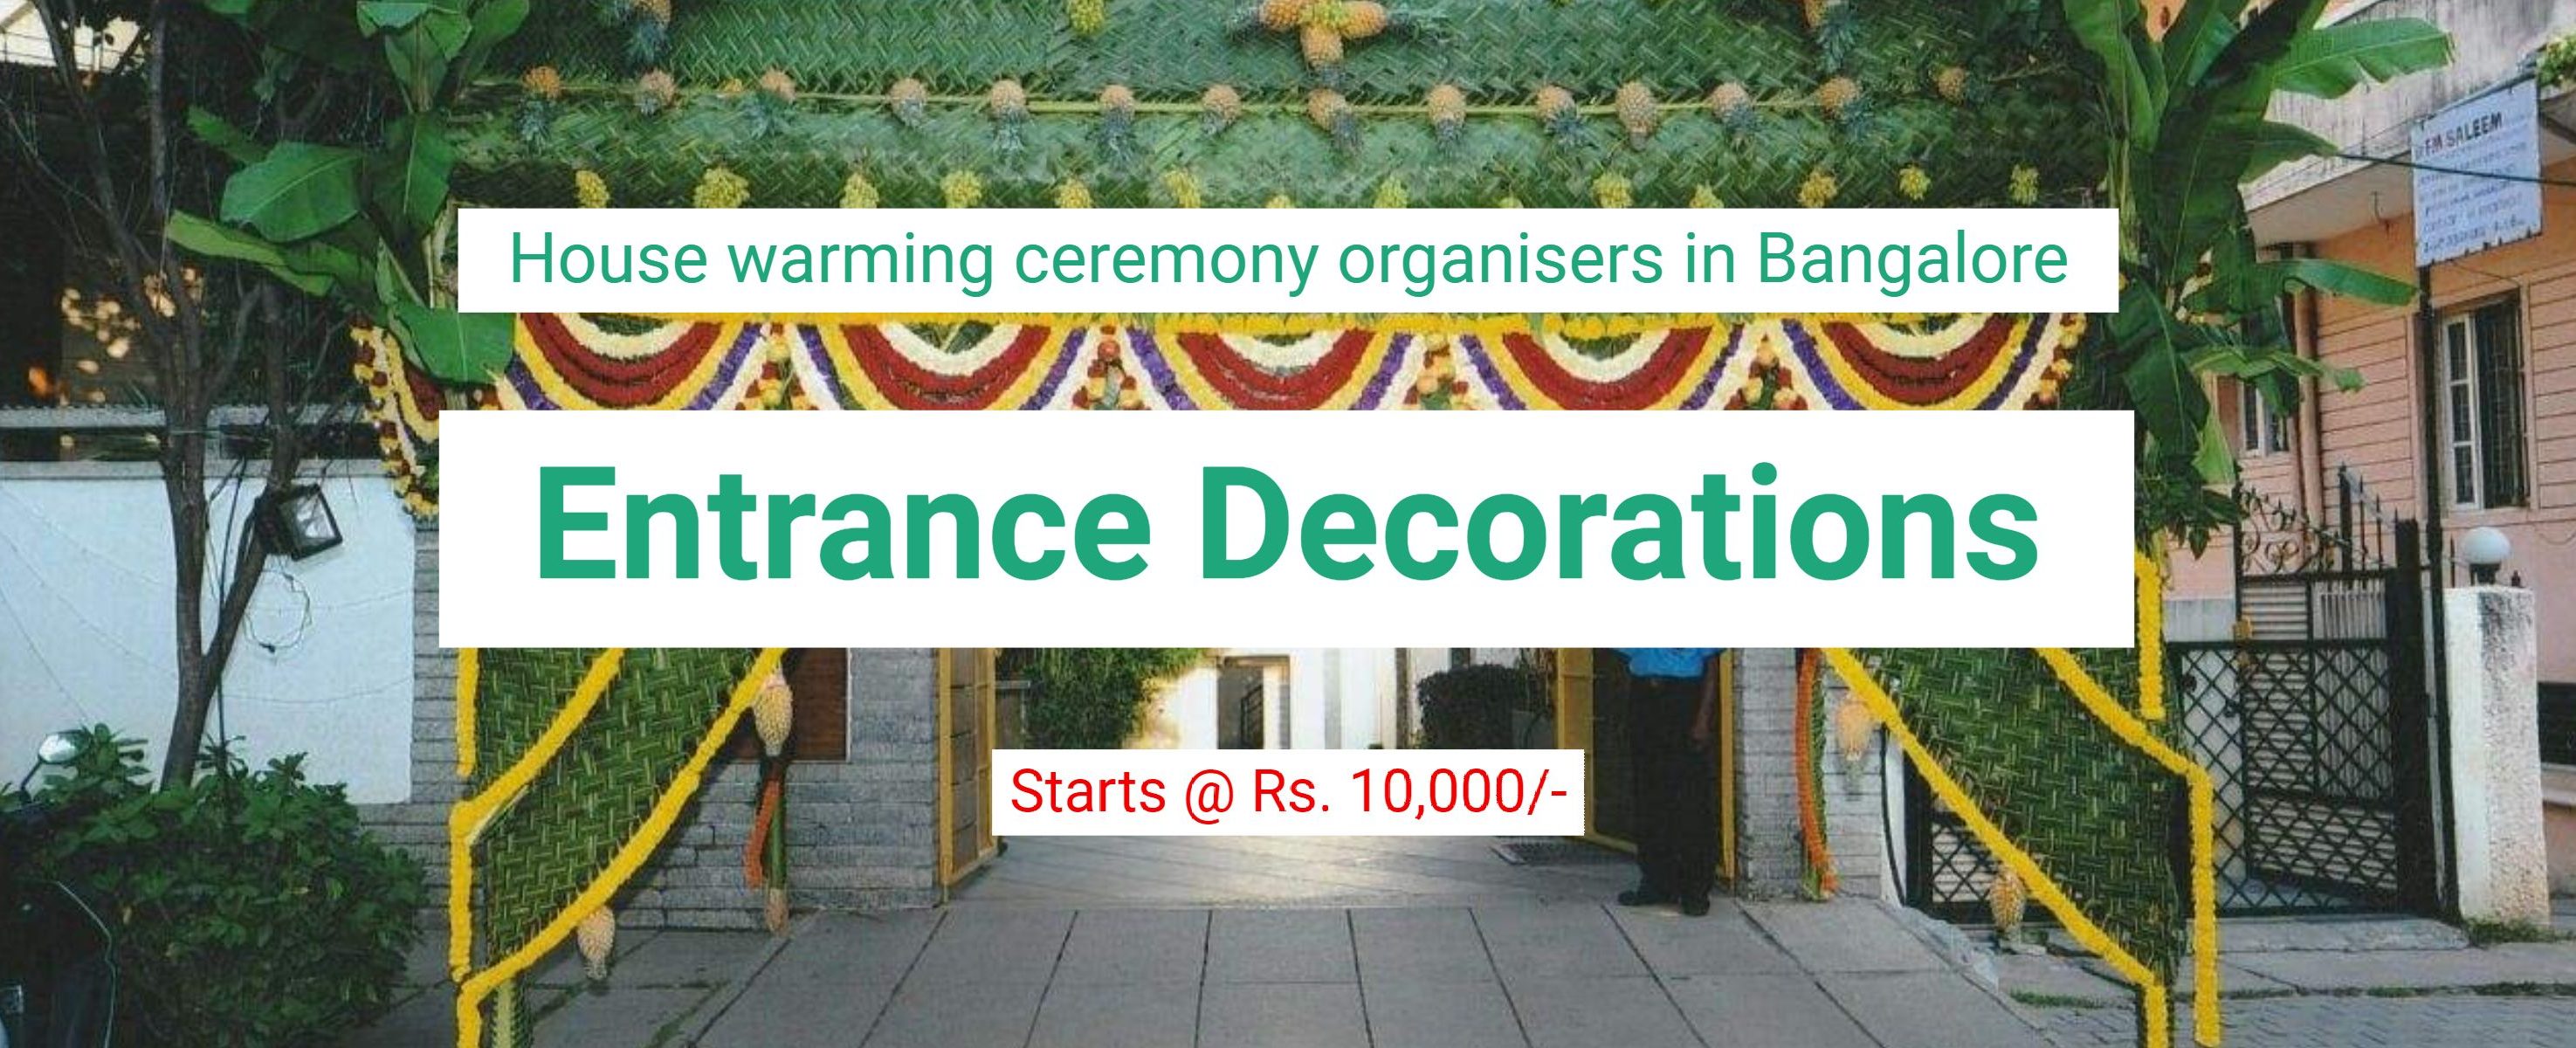 House warming ceremony chapra decorations in Bangalore